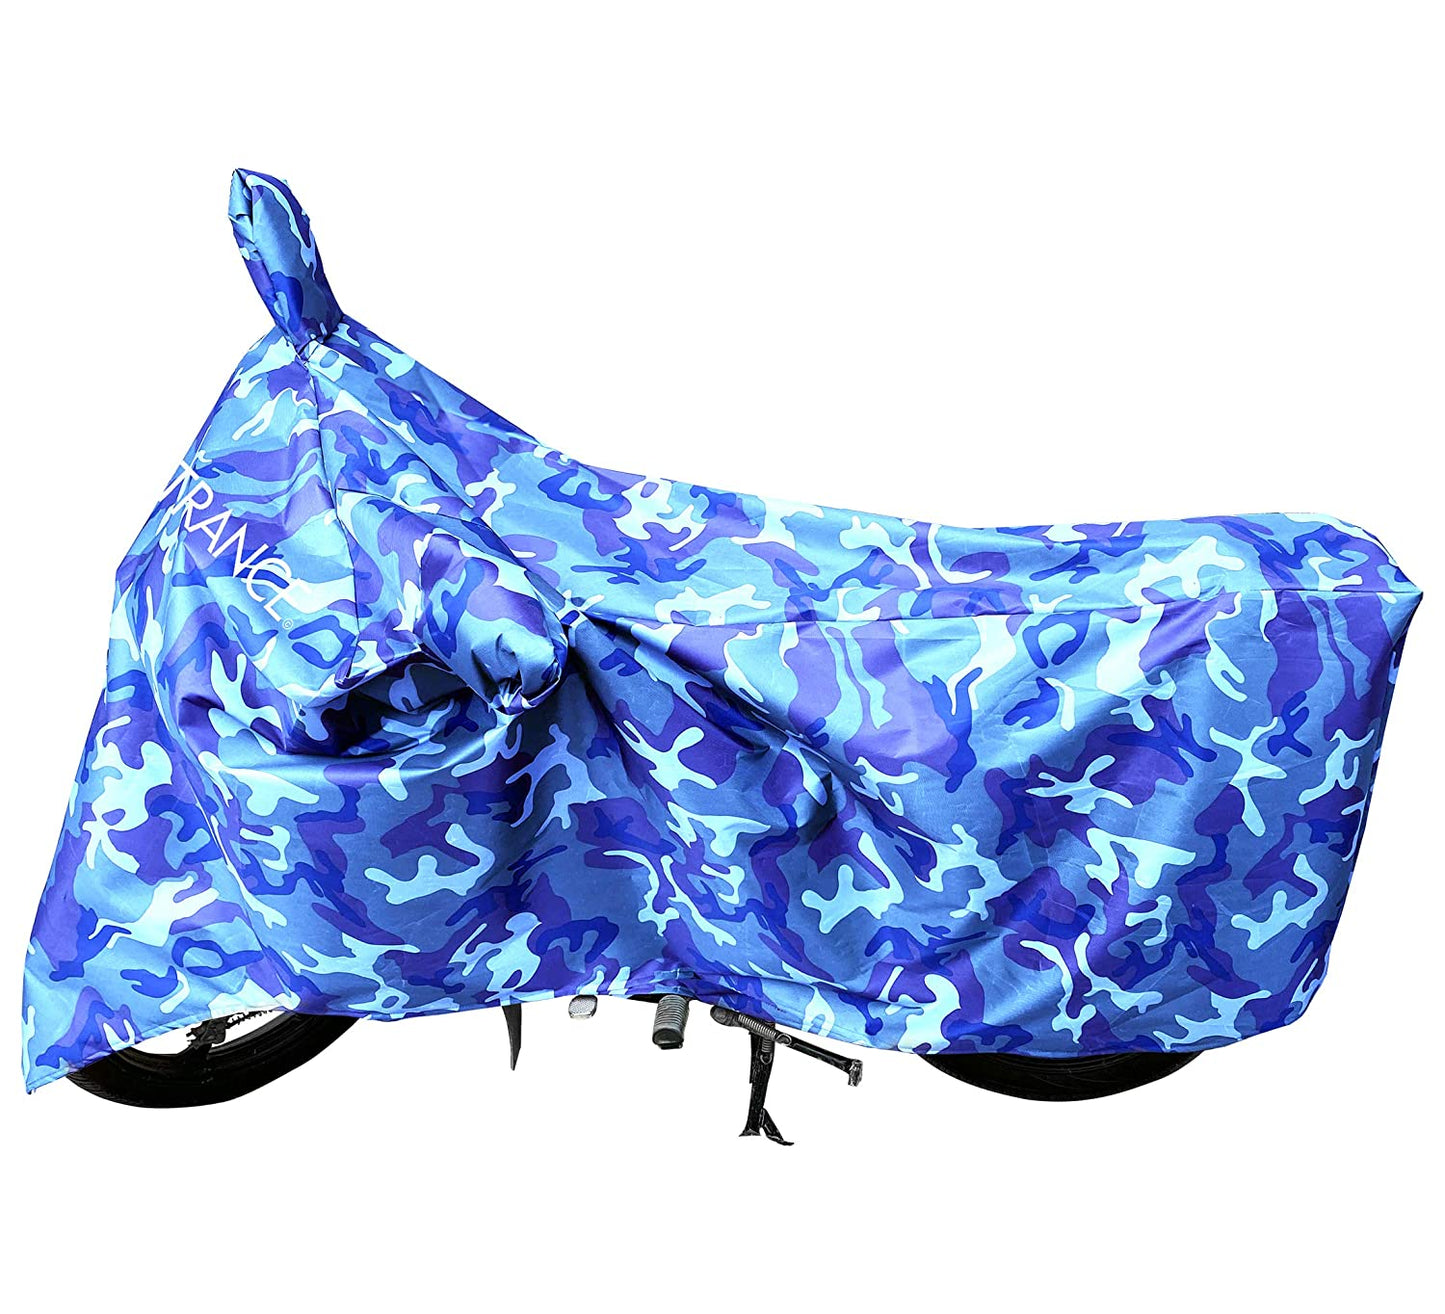 MotoTrance Jungle Bike Body Covers For Bajaj XCD 135 - Interlock-Stitched Waterproof and Heat Resistant with Mirror Pockets